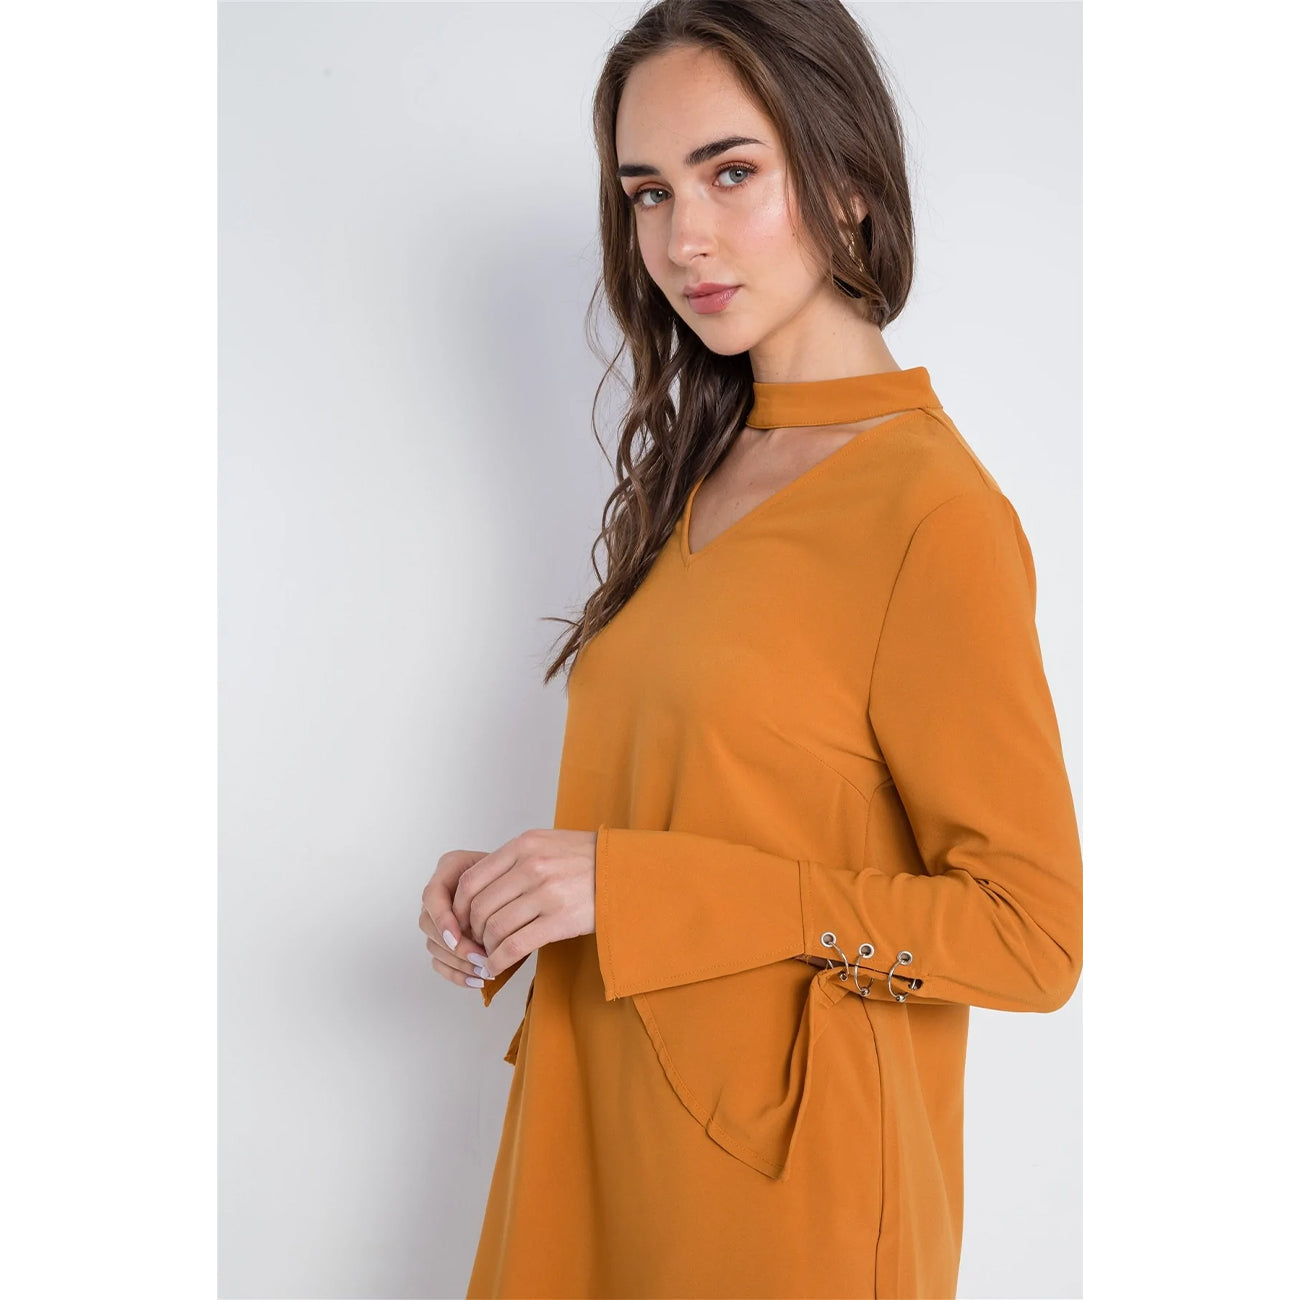 Long Sleeve V-cut Out Solid Mini Dress - Brown